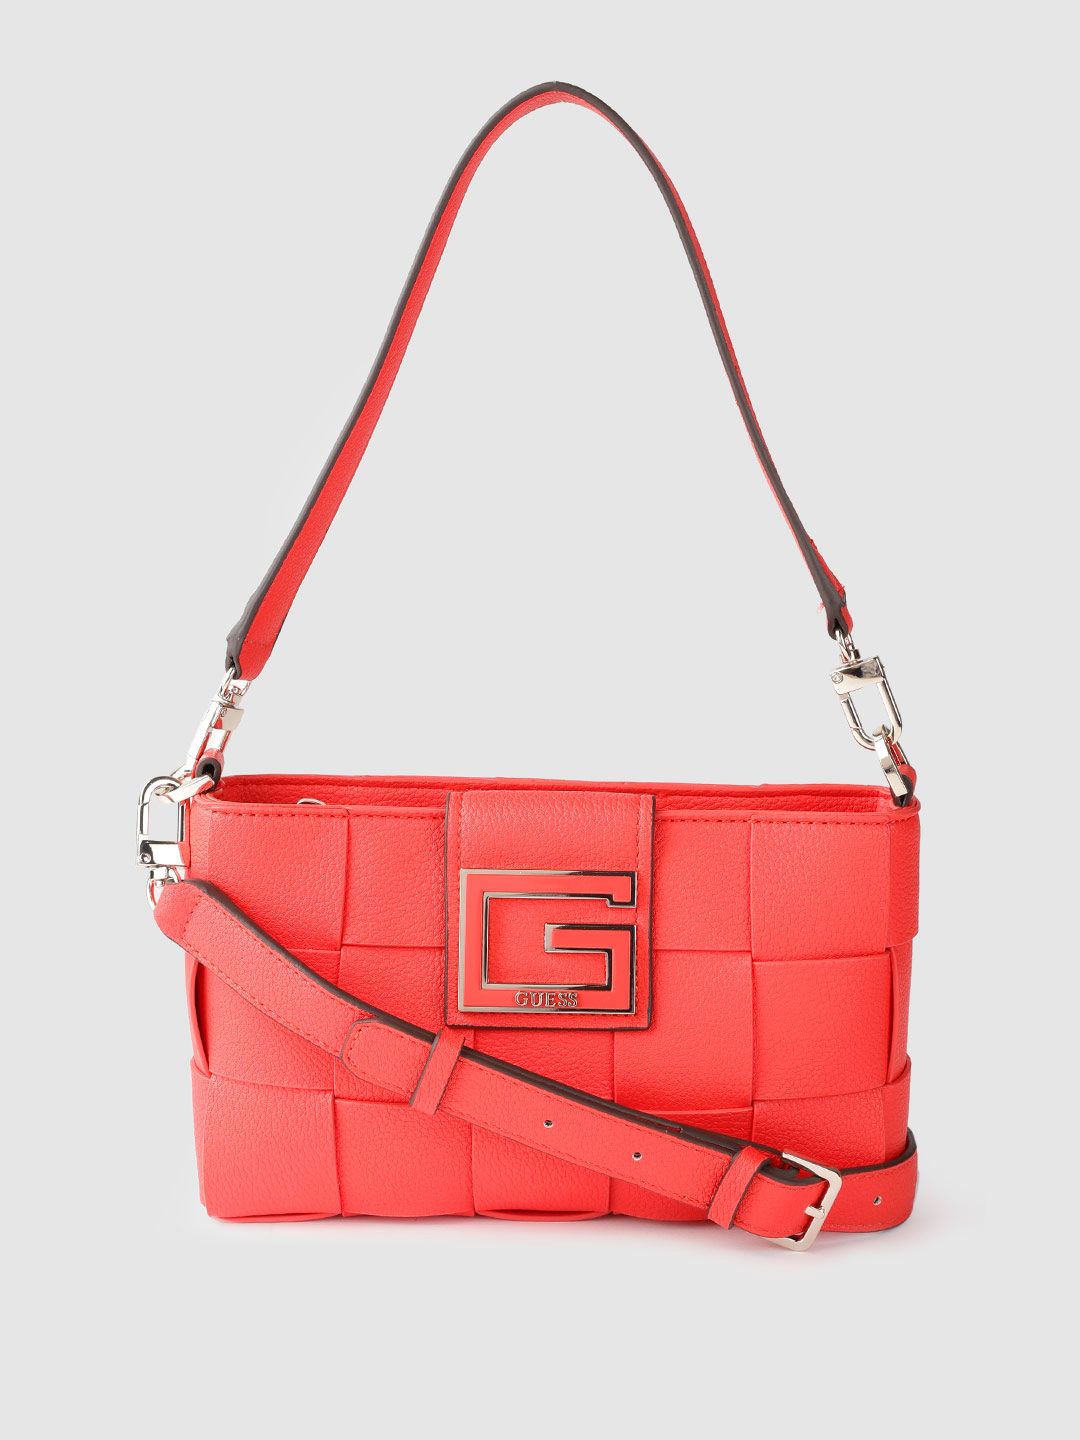 GUESS Coral Red Basket Woven Structured Shoulder Bag with Detachable Sling Strap & Pouch Price in India